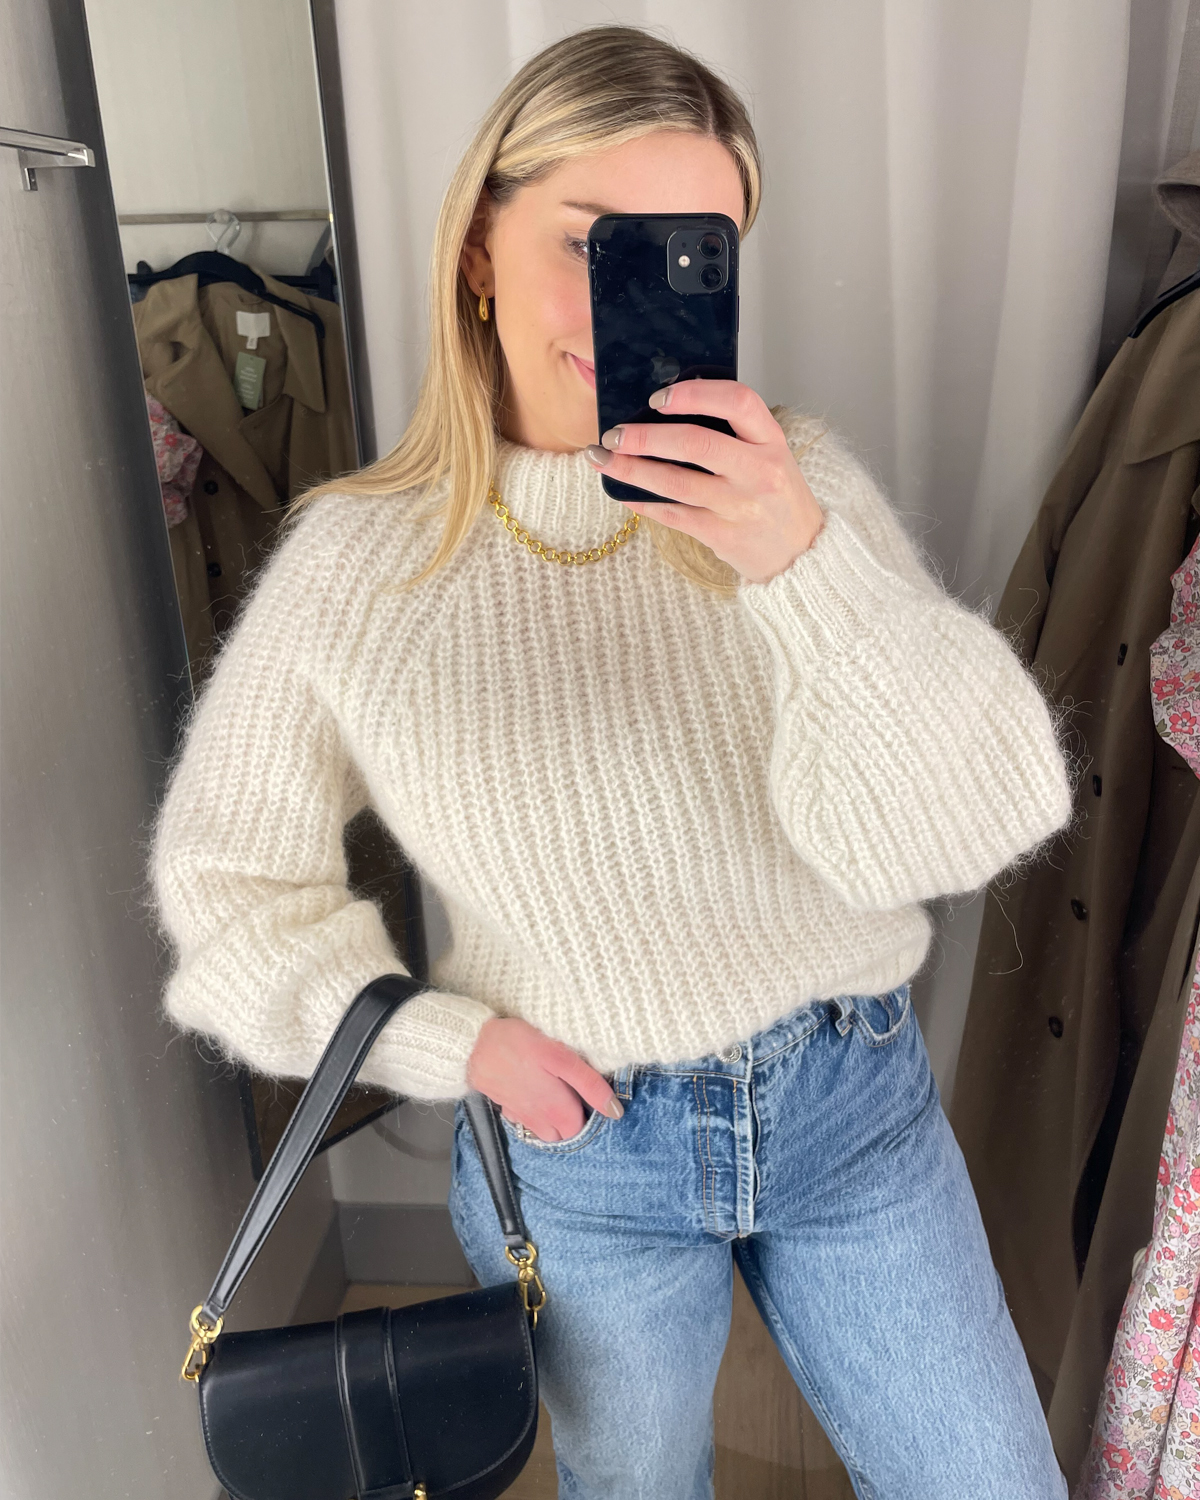 H&M Spring 2022: The classic knit